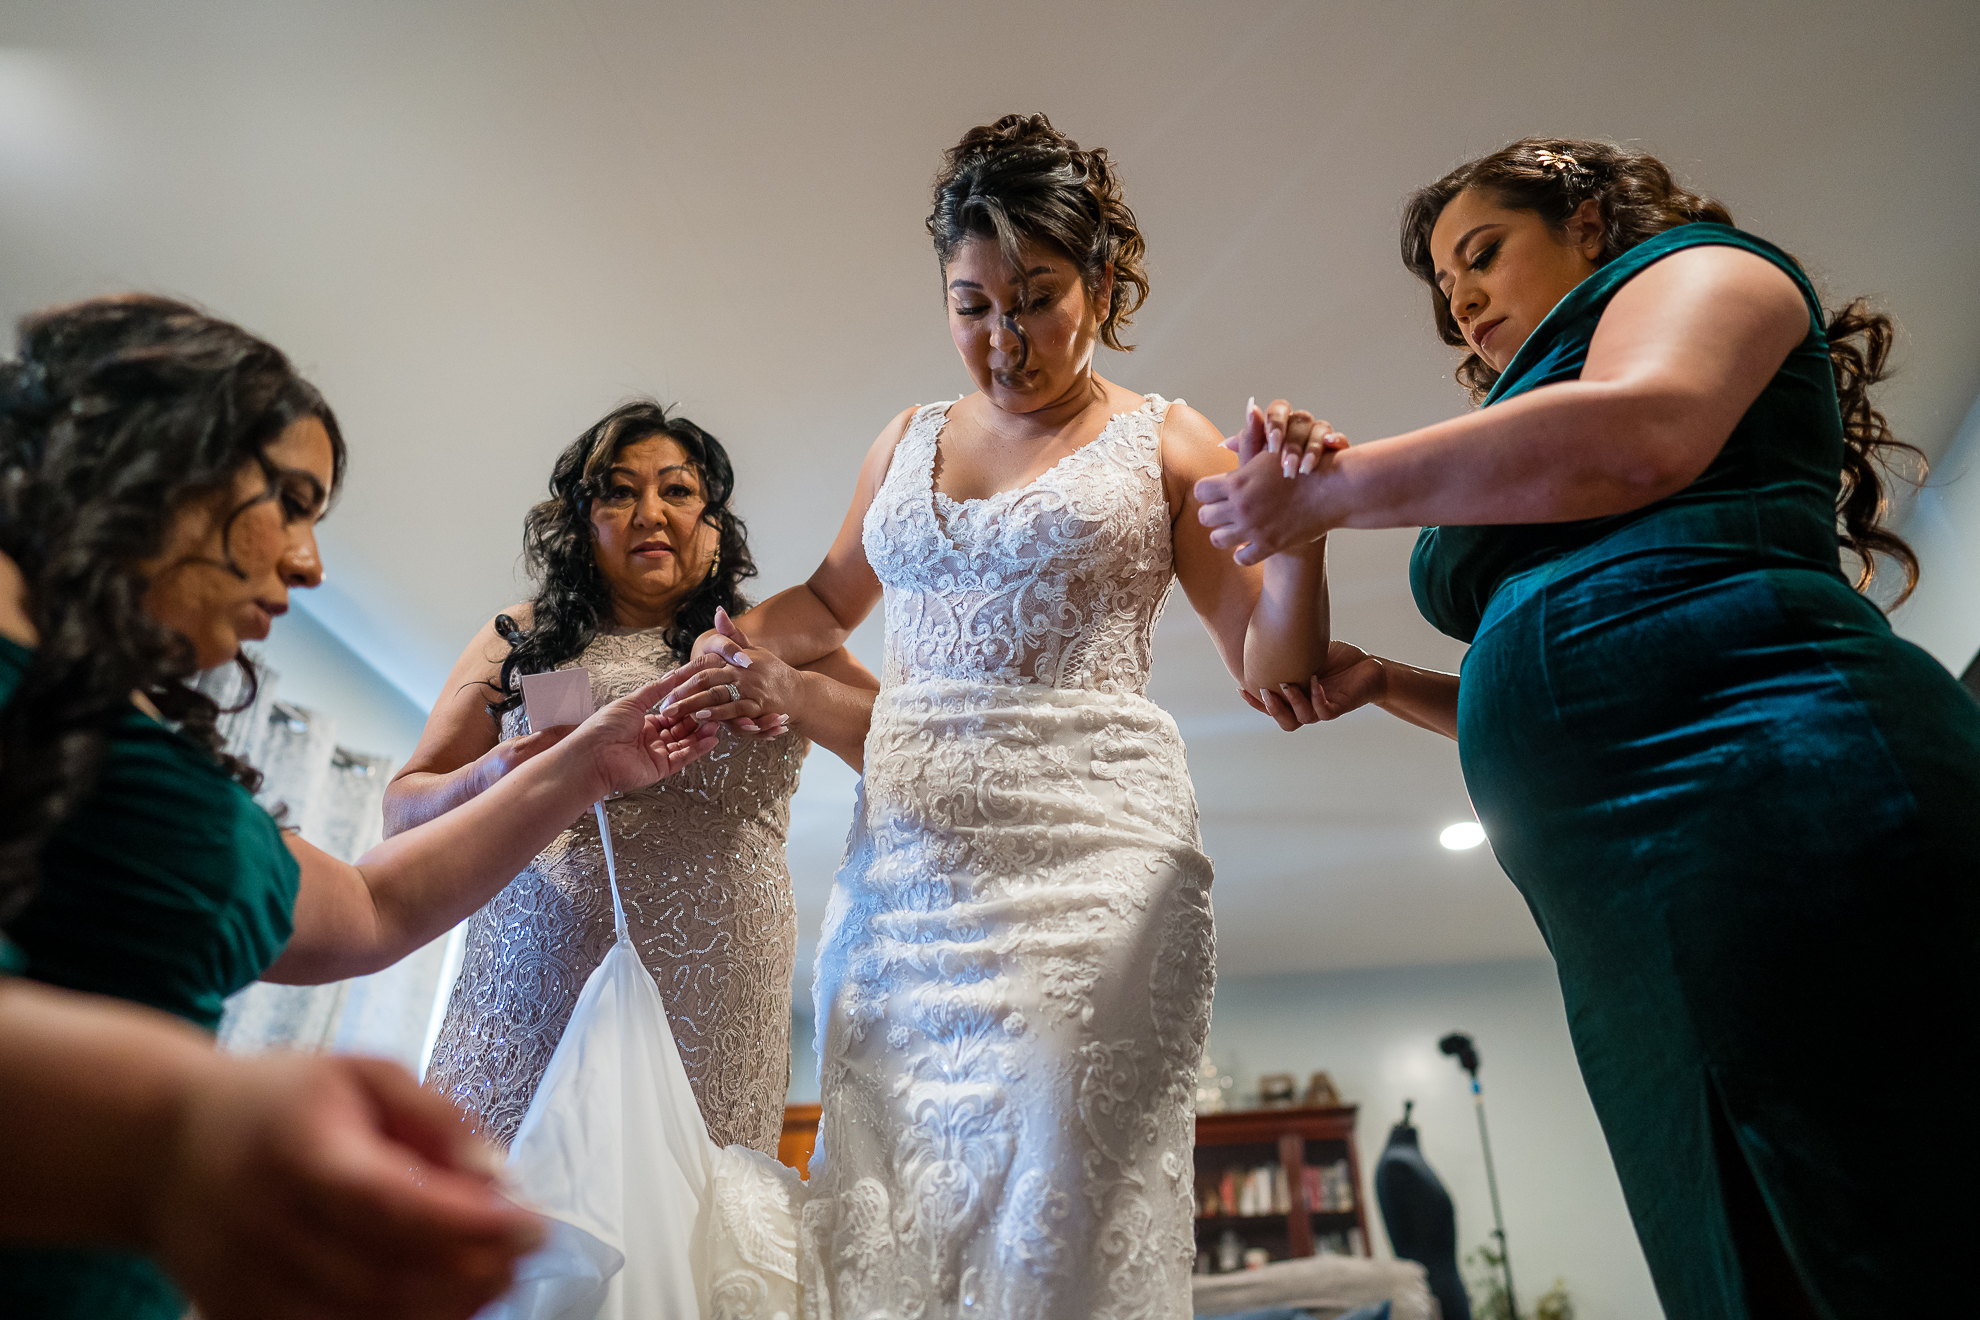 ThomasKim_photography A group of bridesmaids helping each other put on their wedding dresses while S&A.